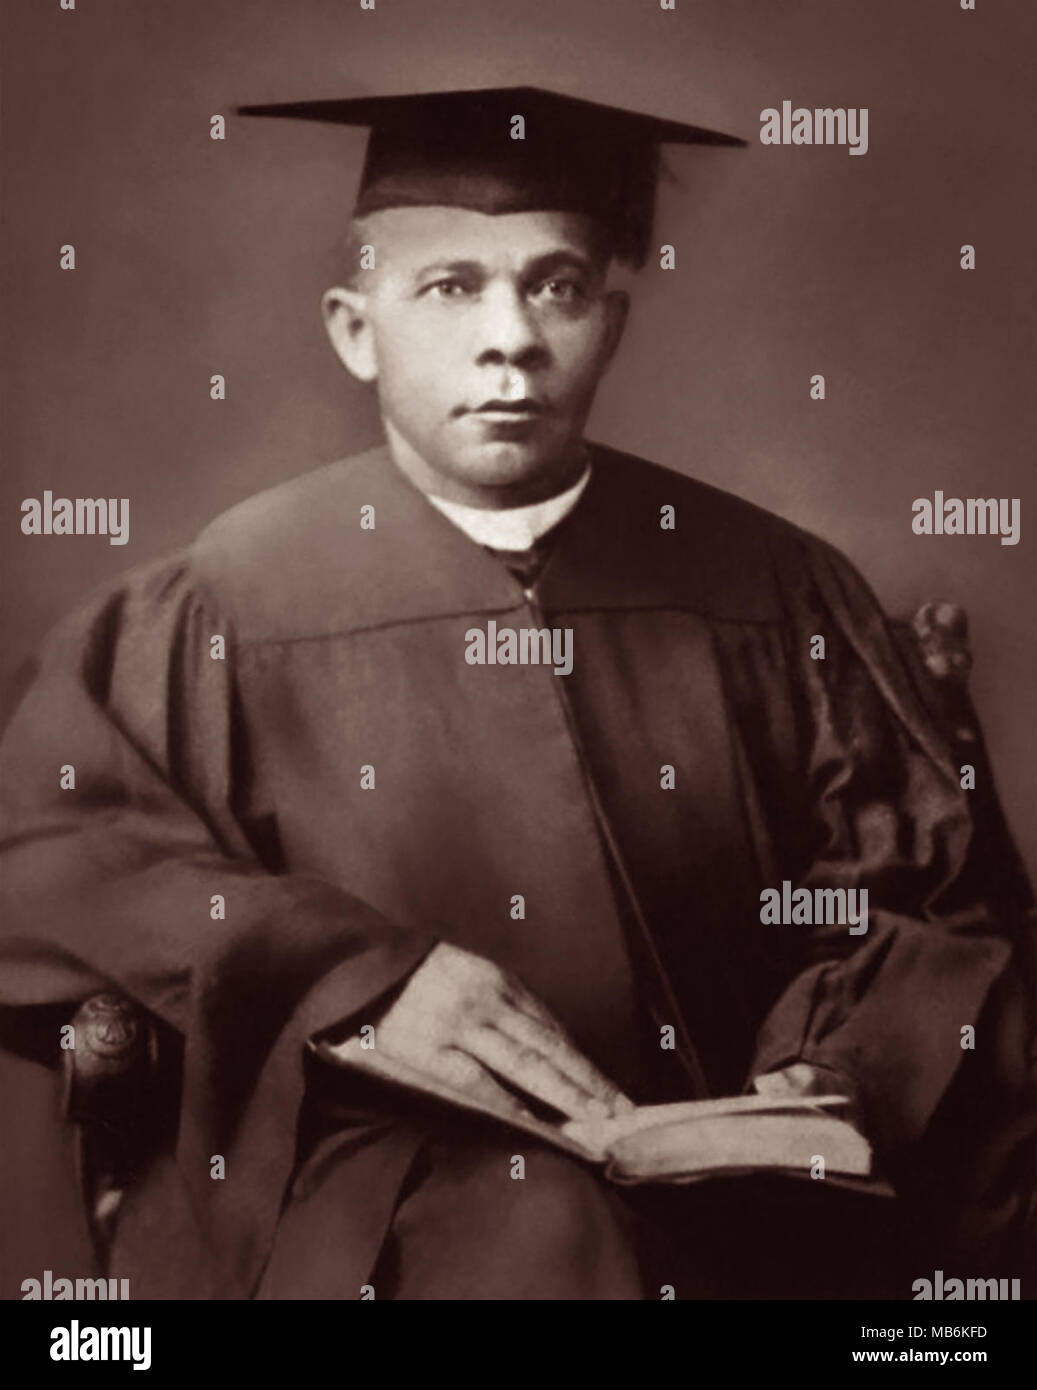 Booker T. Washington (c1856–1915), President of Tuskegee Institute (initially Tuskegee Normal School for Colored Teachers), in graduation cap and gown attire. Washington was also an author, orator, and advisor to U.S. presidents. Stock Photo